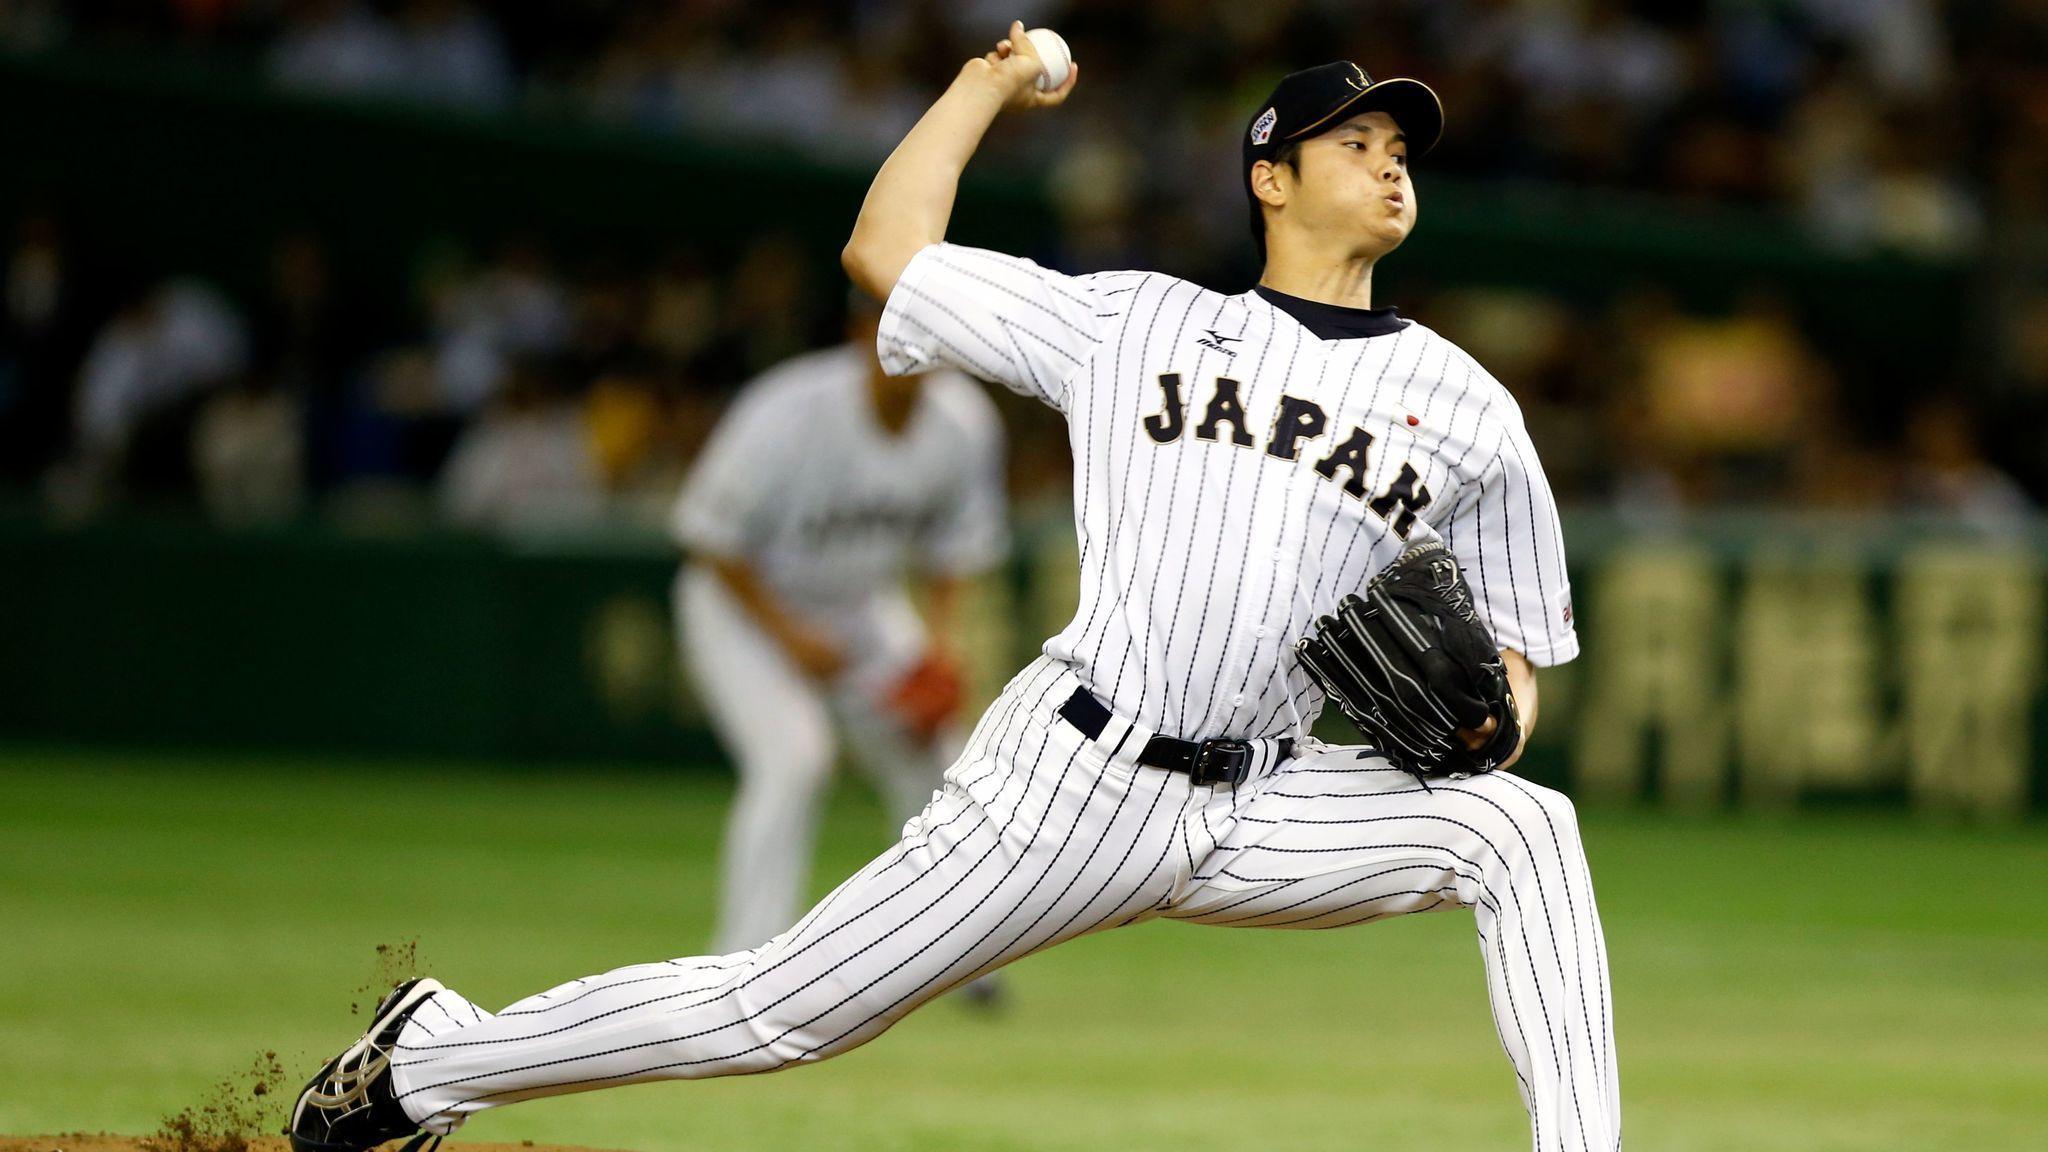 Padres mailbag: Does anyone know anything about Shohei Ohtani